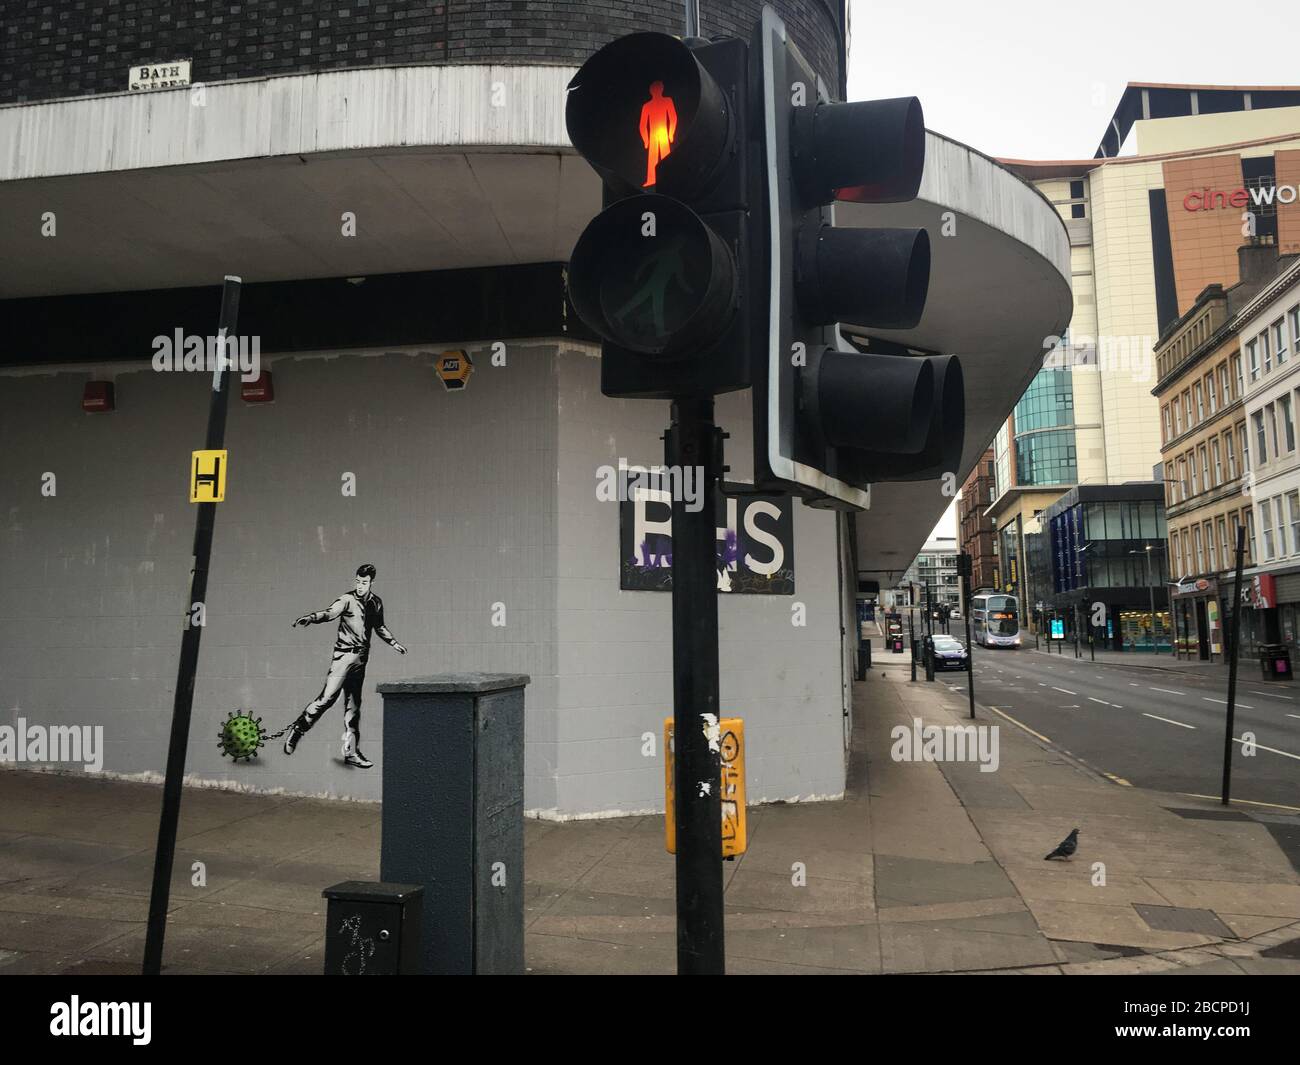 Glasgow, UK. 5th Apr, 2020. A new mural by the street artist The Rebel Bear depicting a man chained to a virus molecule, in empty streets in the city centre, illustrating that social distancing guidelines and 'stay at home' advisories are being adhered to in the time of Coronavirus COVID-19 pandemic crisis. Photo Credit: jeremy sutton-hibbert/Alamy Live News Stock Photo